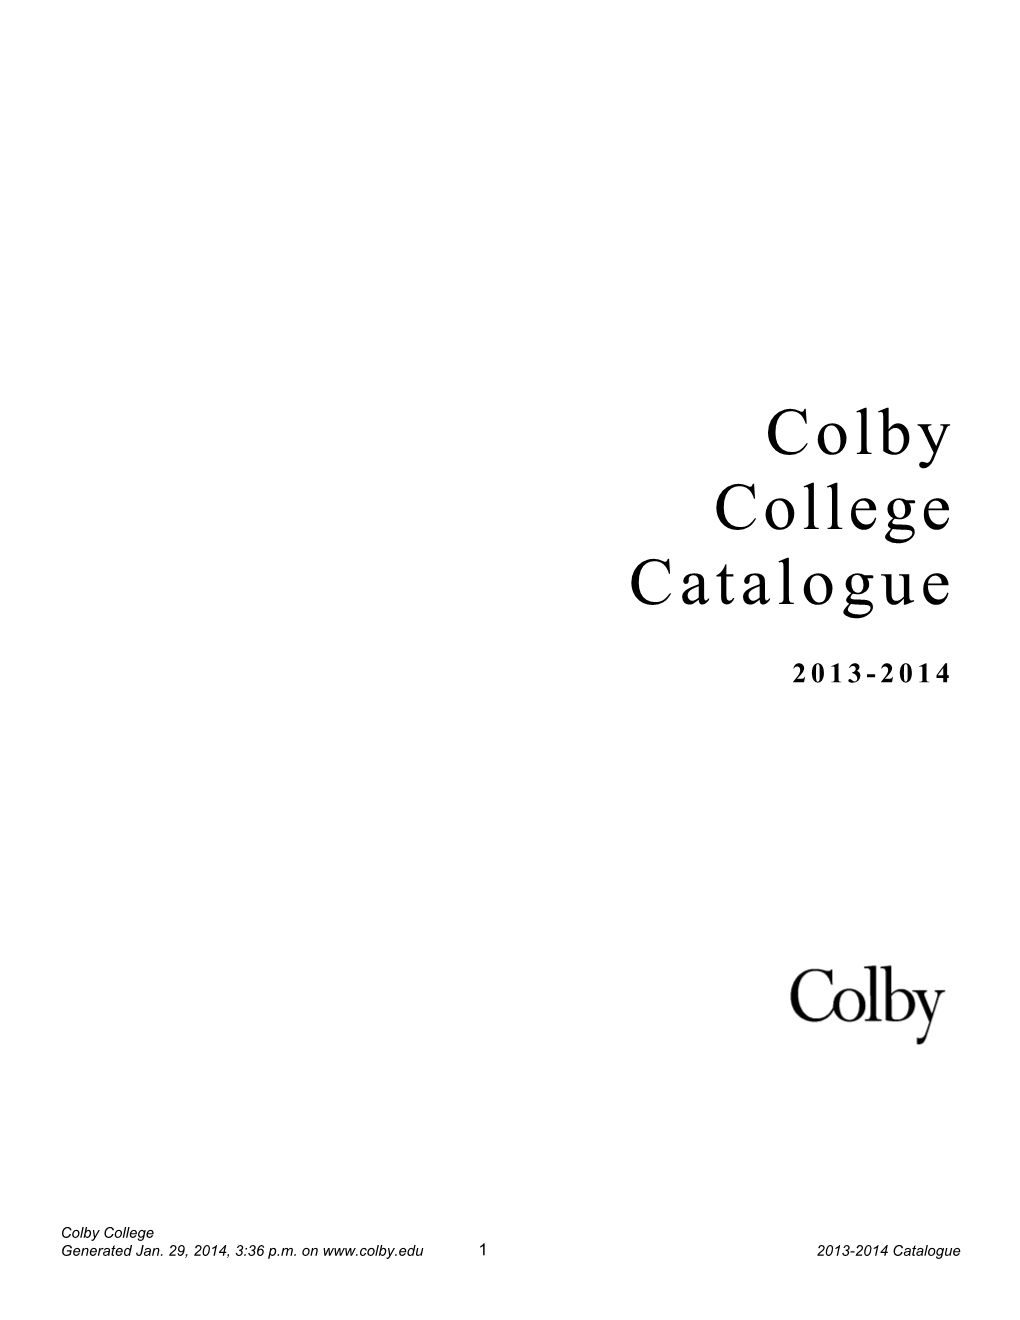 Colby College Catalogue